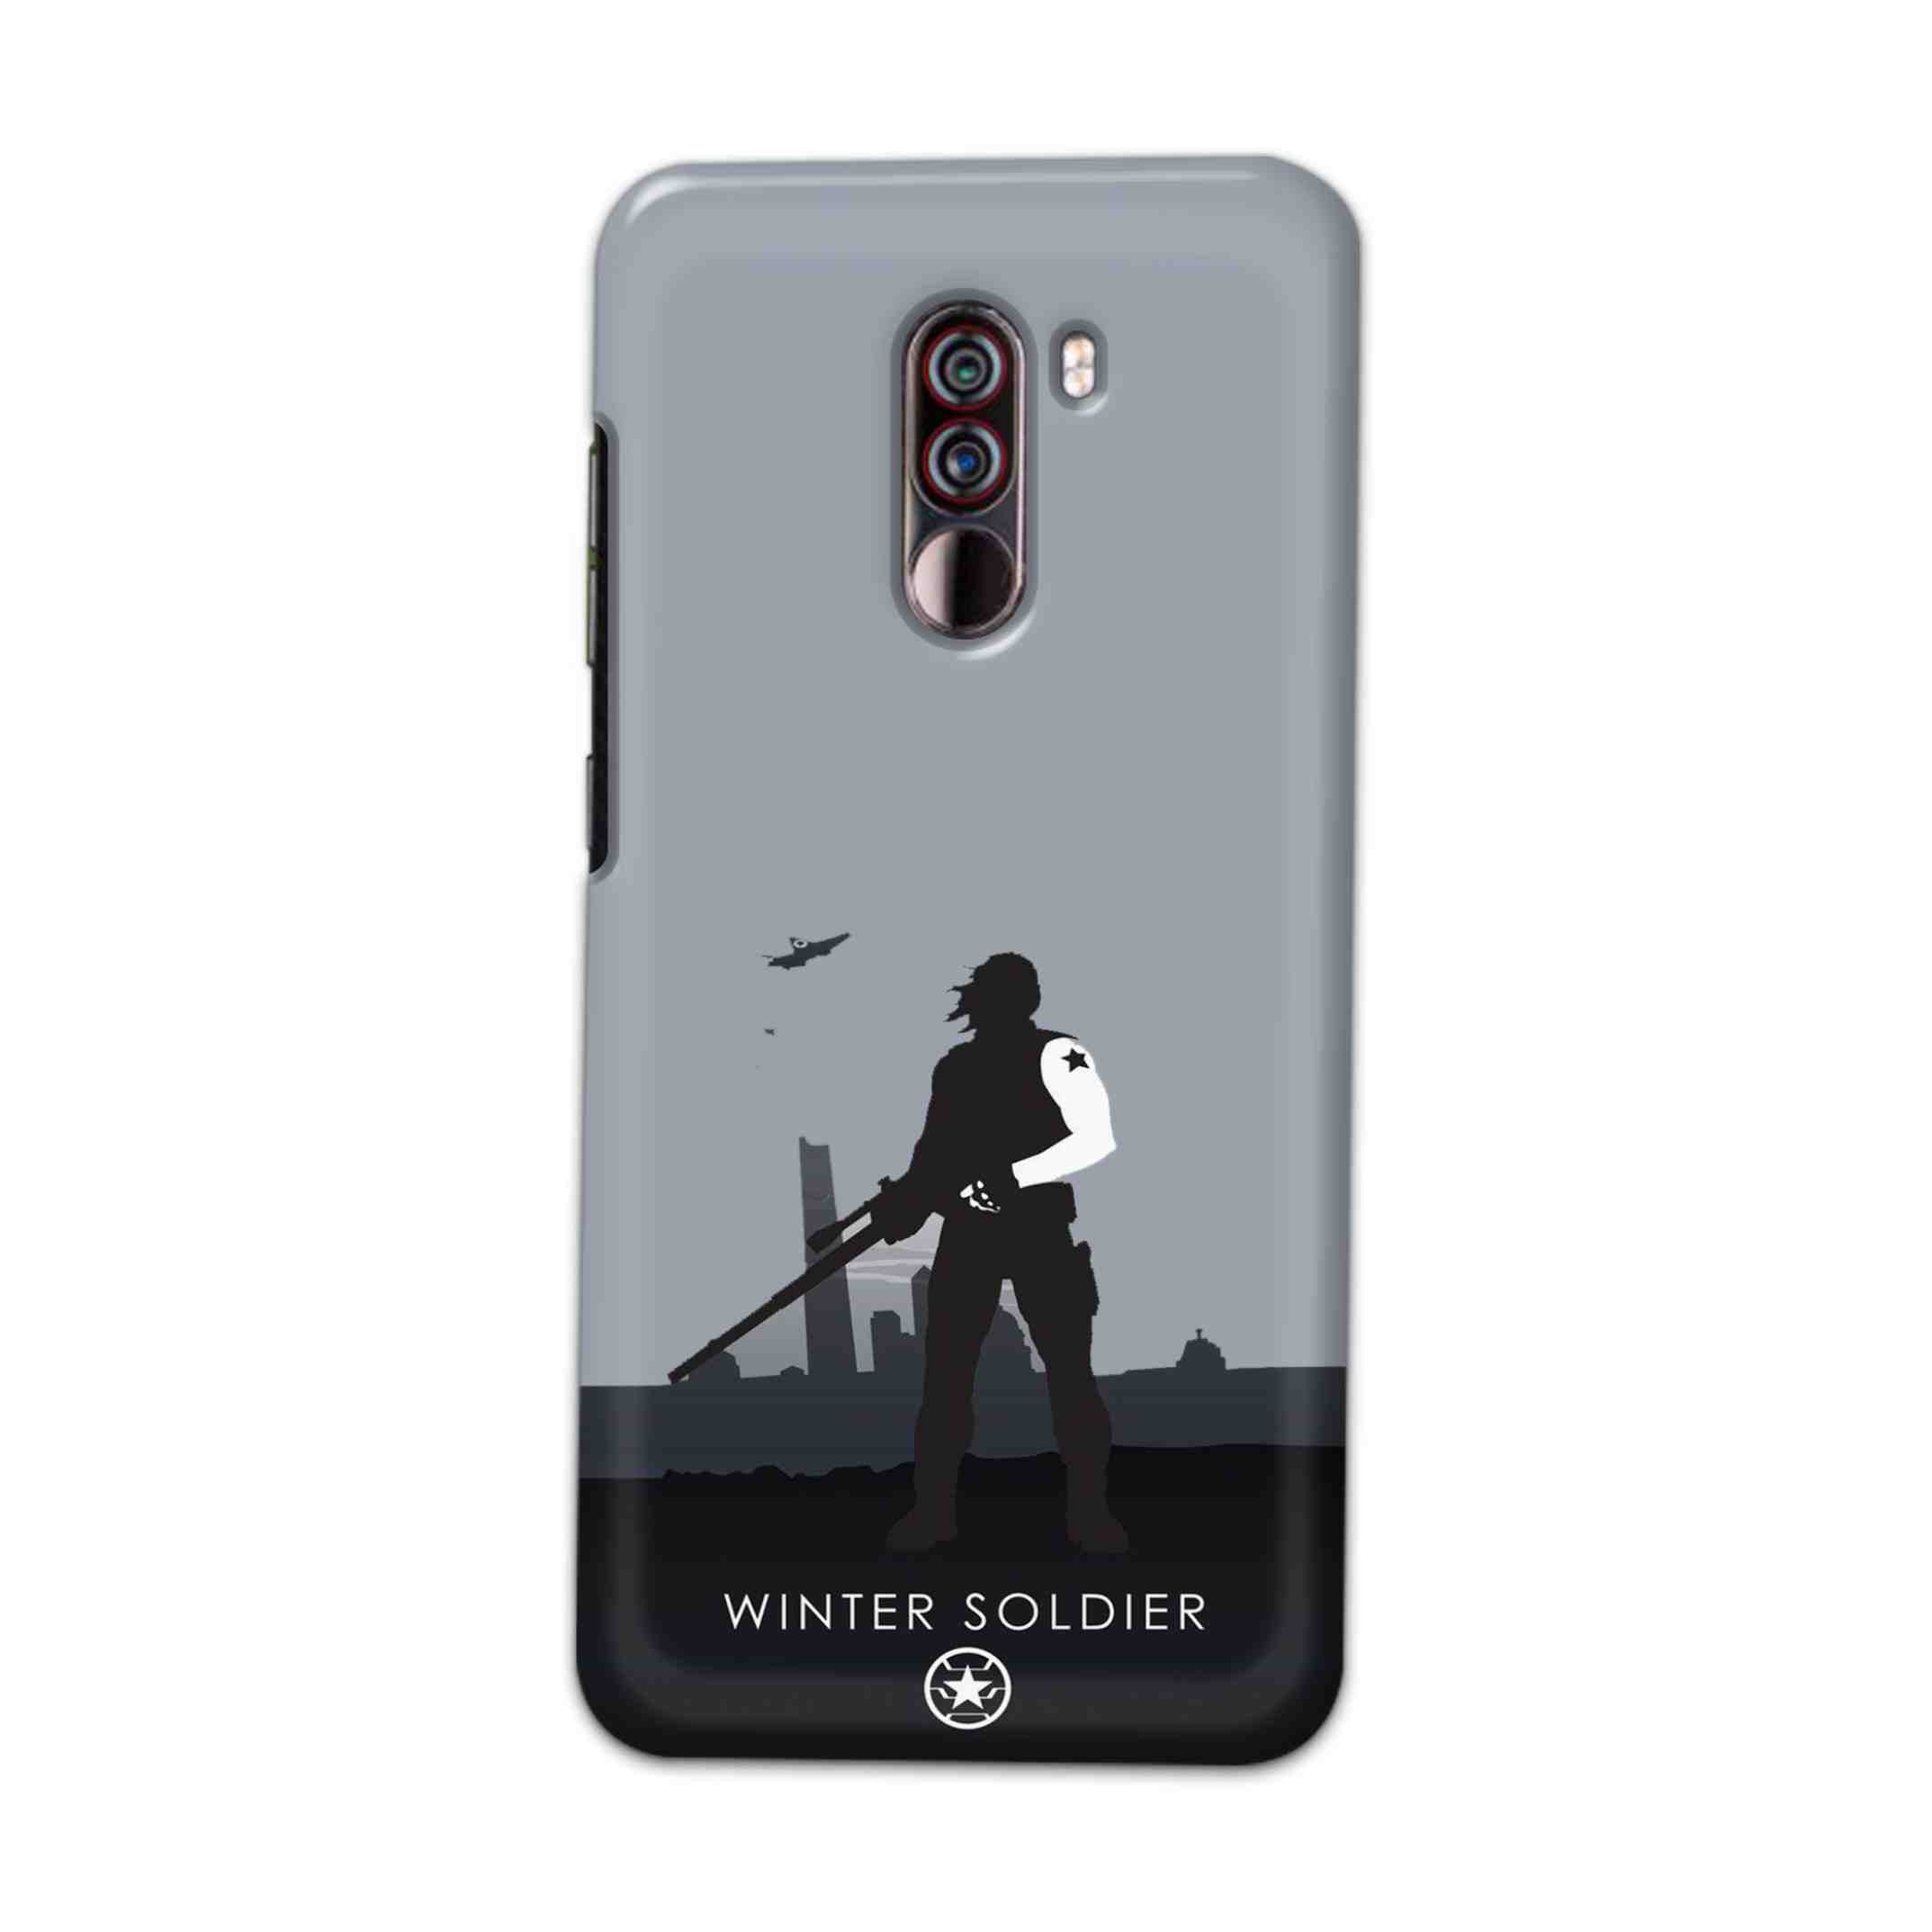 Buy Winter Soldier Hard Back Mobile Phone Case Cover For Xiaomi Pocophone F1 Online